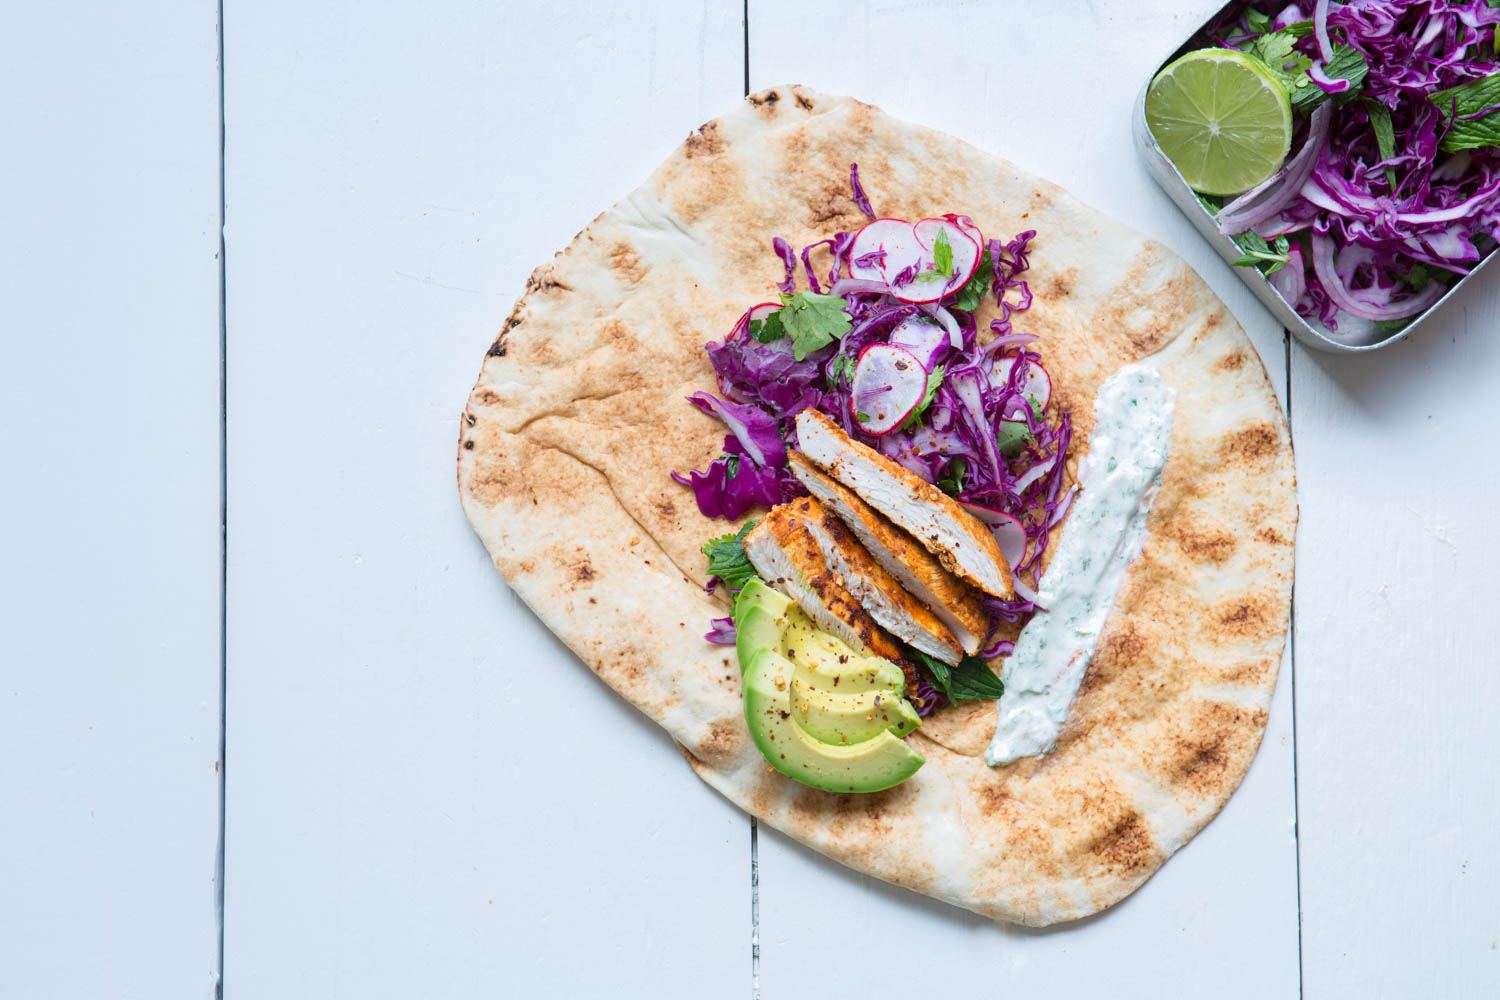 Paprika, Lime Chicken & Creamy Slaw ‘Tacos’